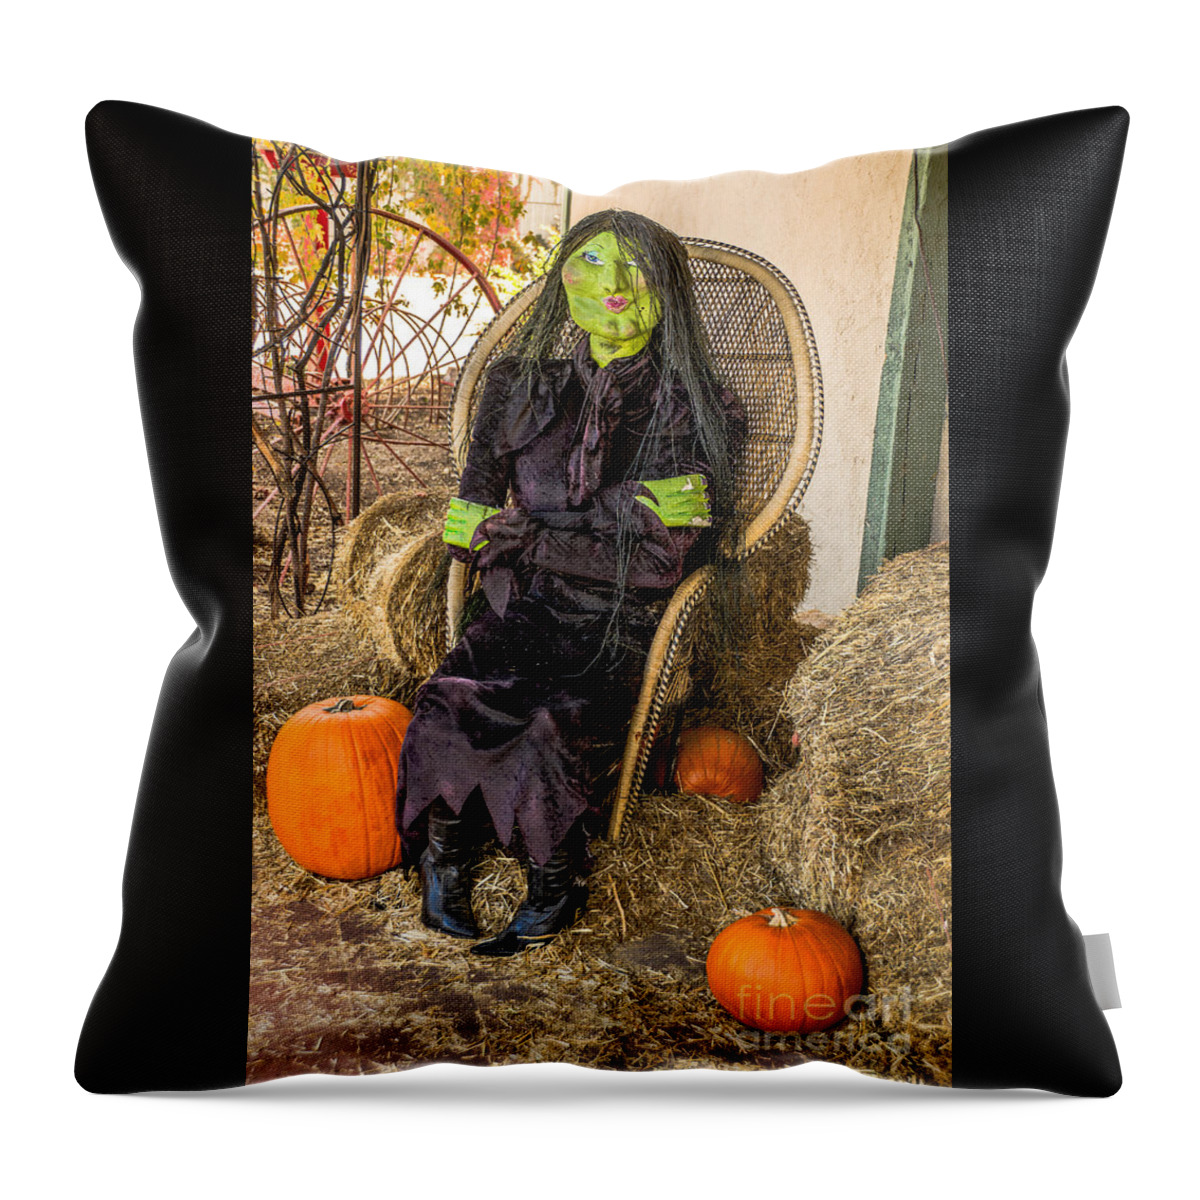 Halloween Throw Pillow featuring the photograph Give Me A Kiss by Sue Smith